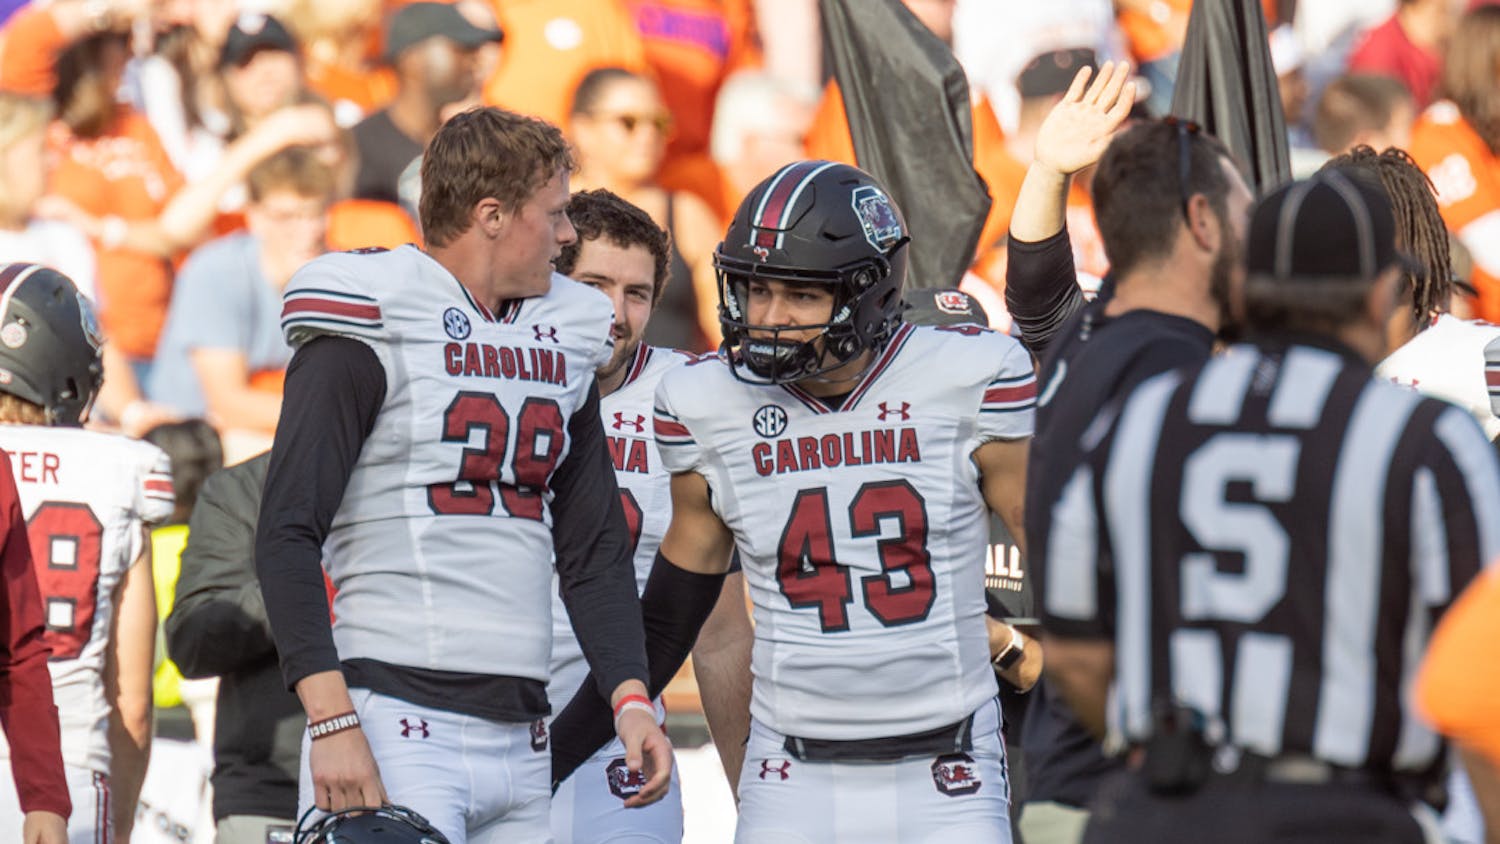 Junior punter Kai Kroeger discussing with redshirt freshman Joseph Byrnes during a timeout on Nov. 26, 2022 at Memorial Stadium. Kroeger punted a total of 376 yards against Clemson.